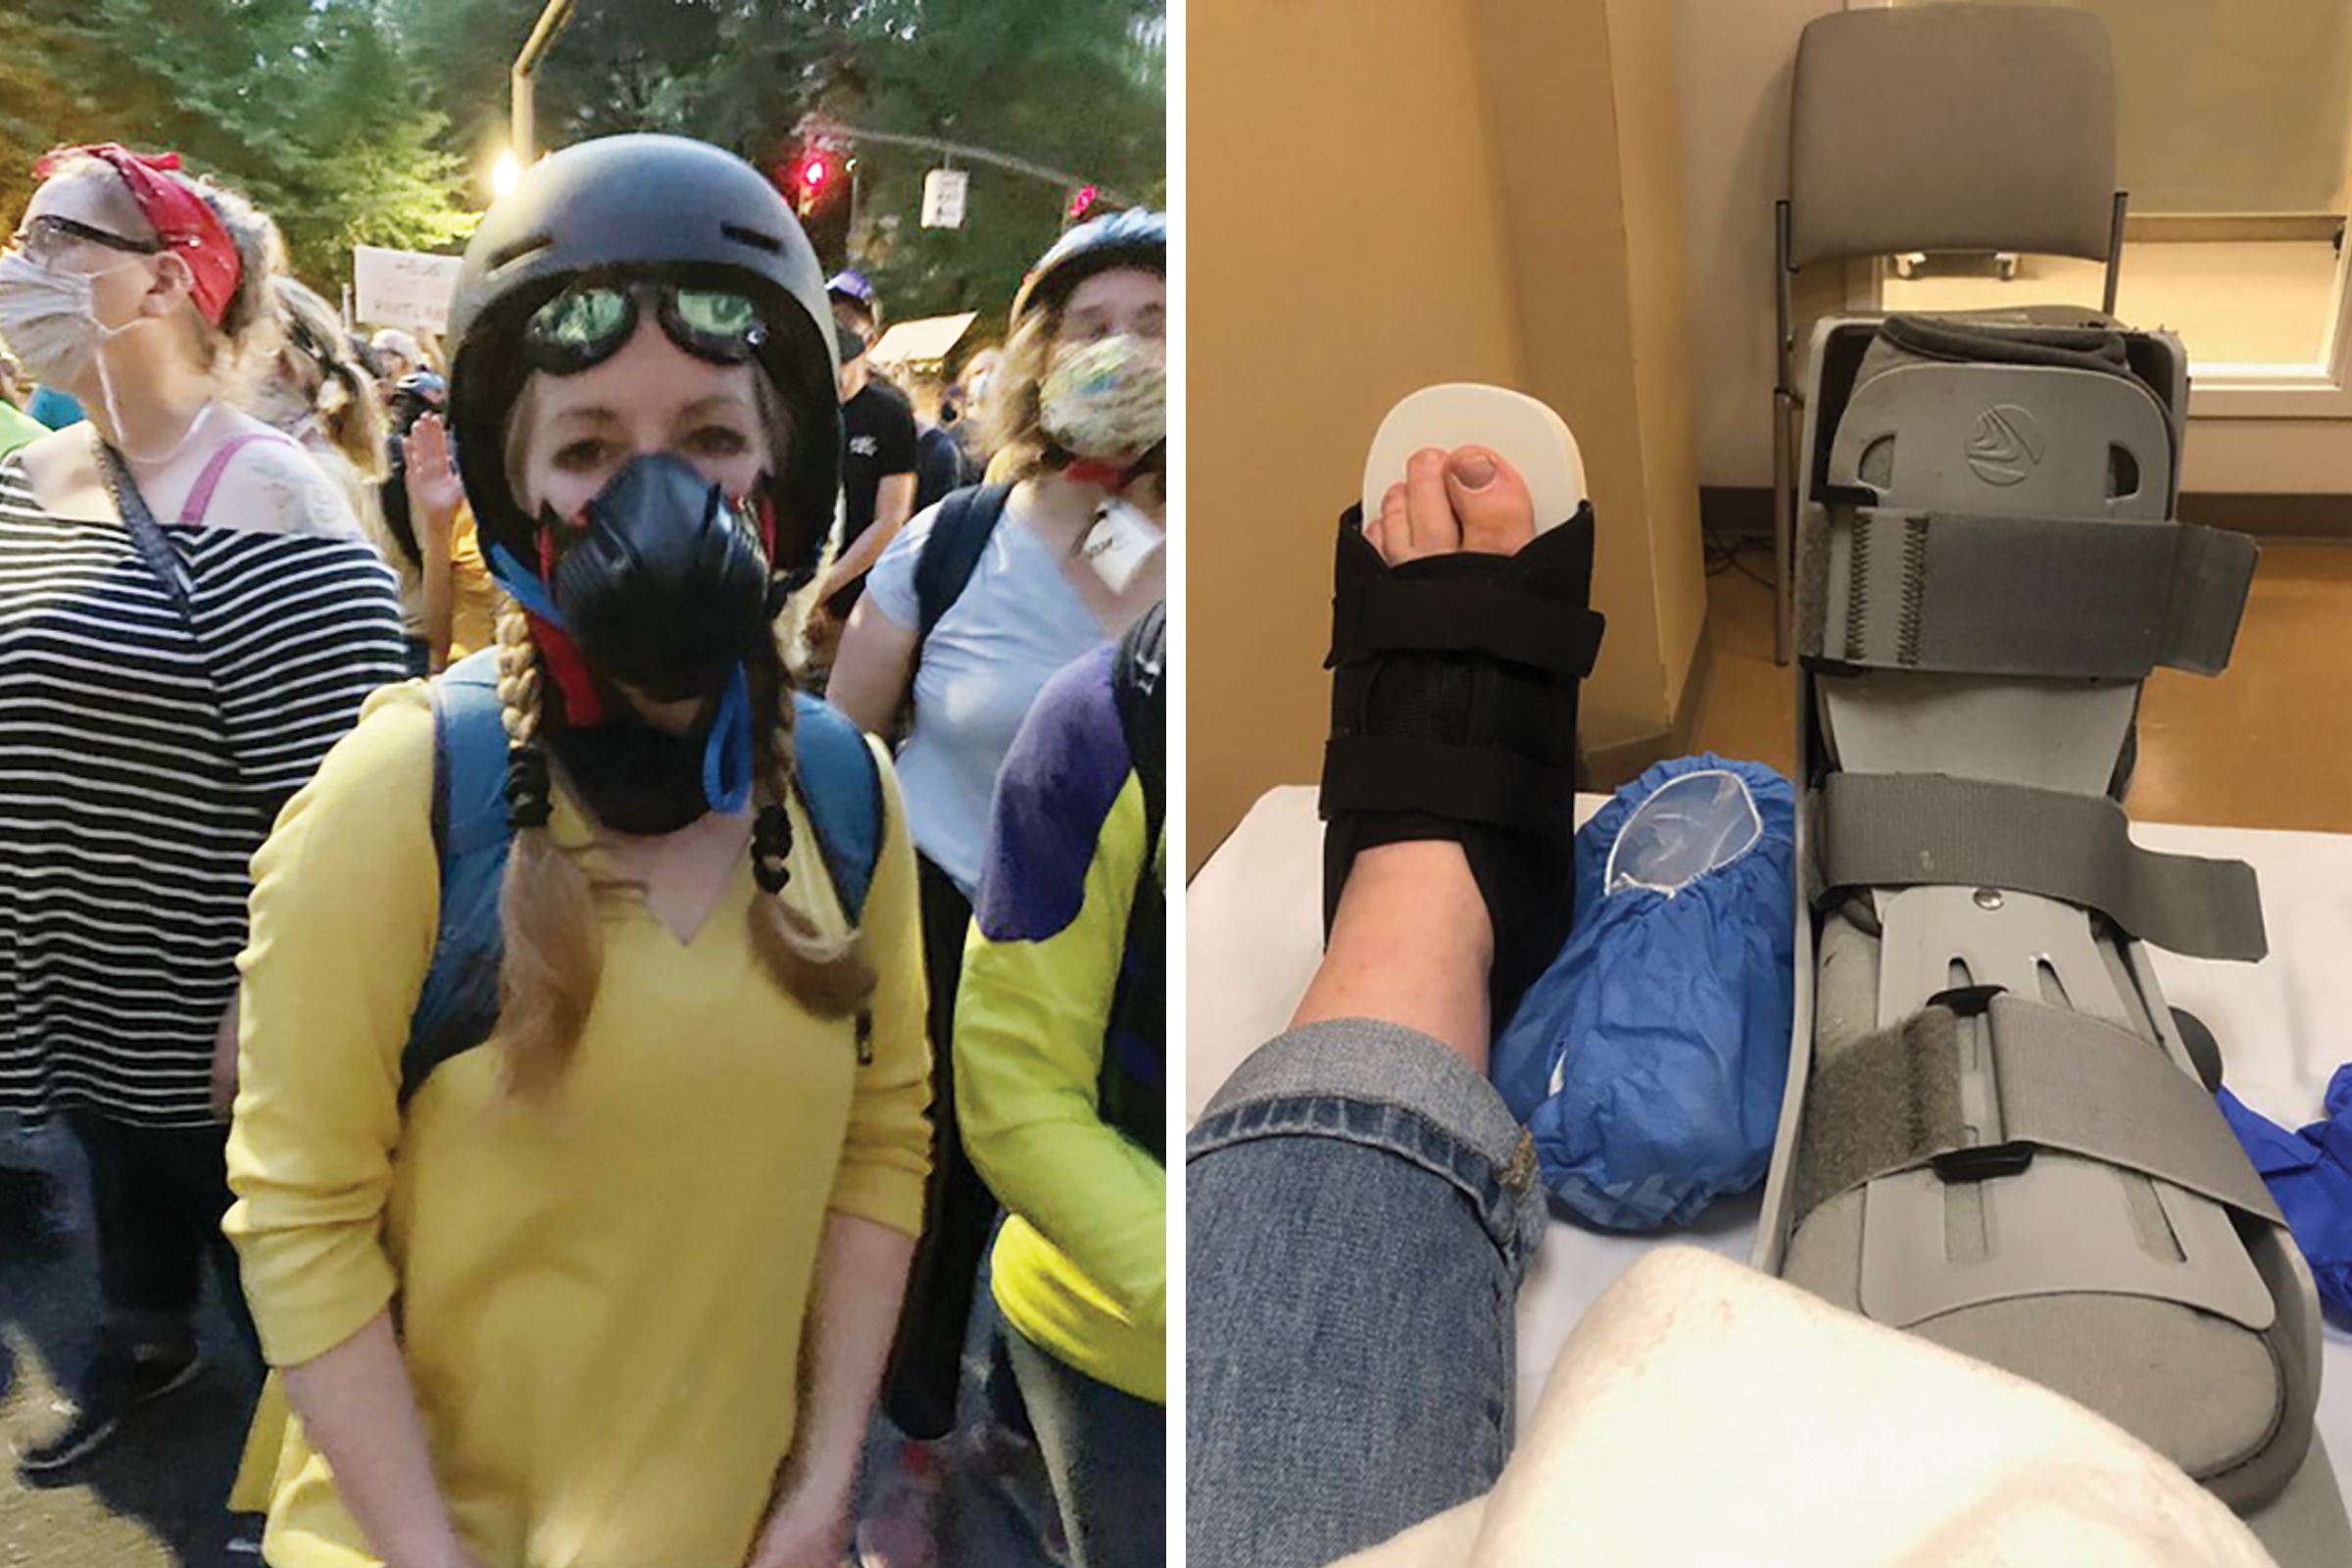 Ellen Urbani was hit in the foot by what she believes was a rubber bullet at a protest in Portland, Ore., on July 24. (Courtesy Joan Henderson-Gaither/Ellen Urbani)